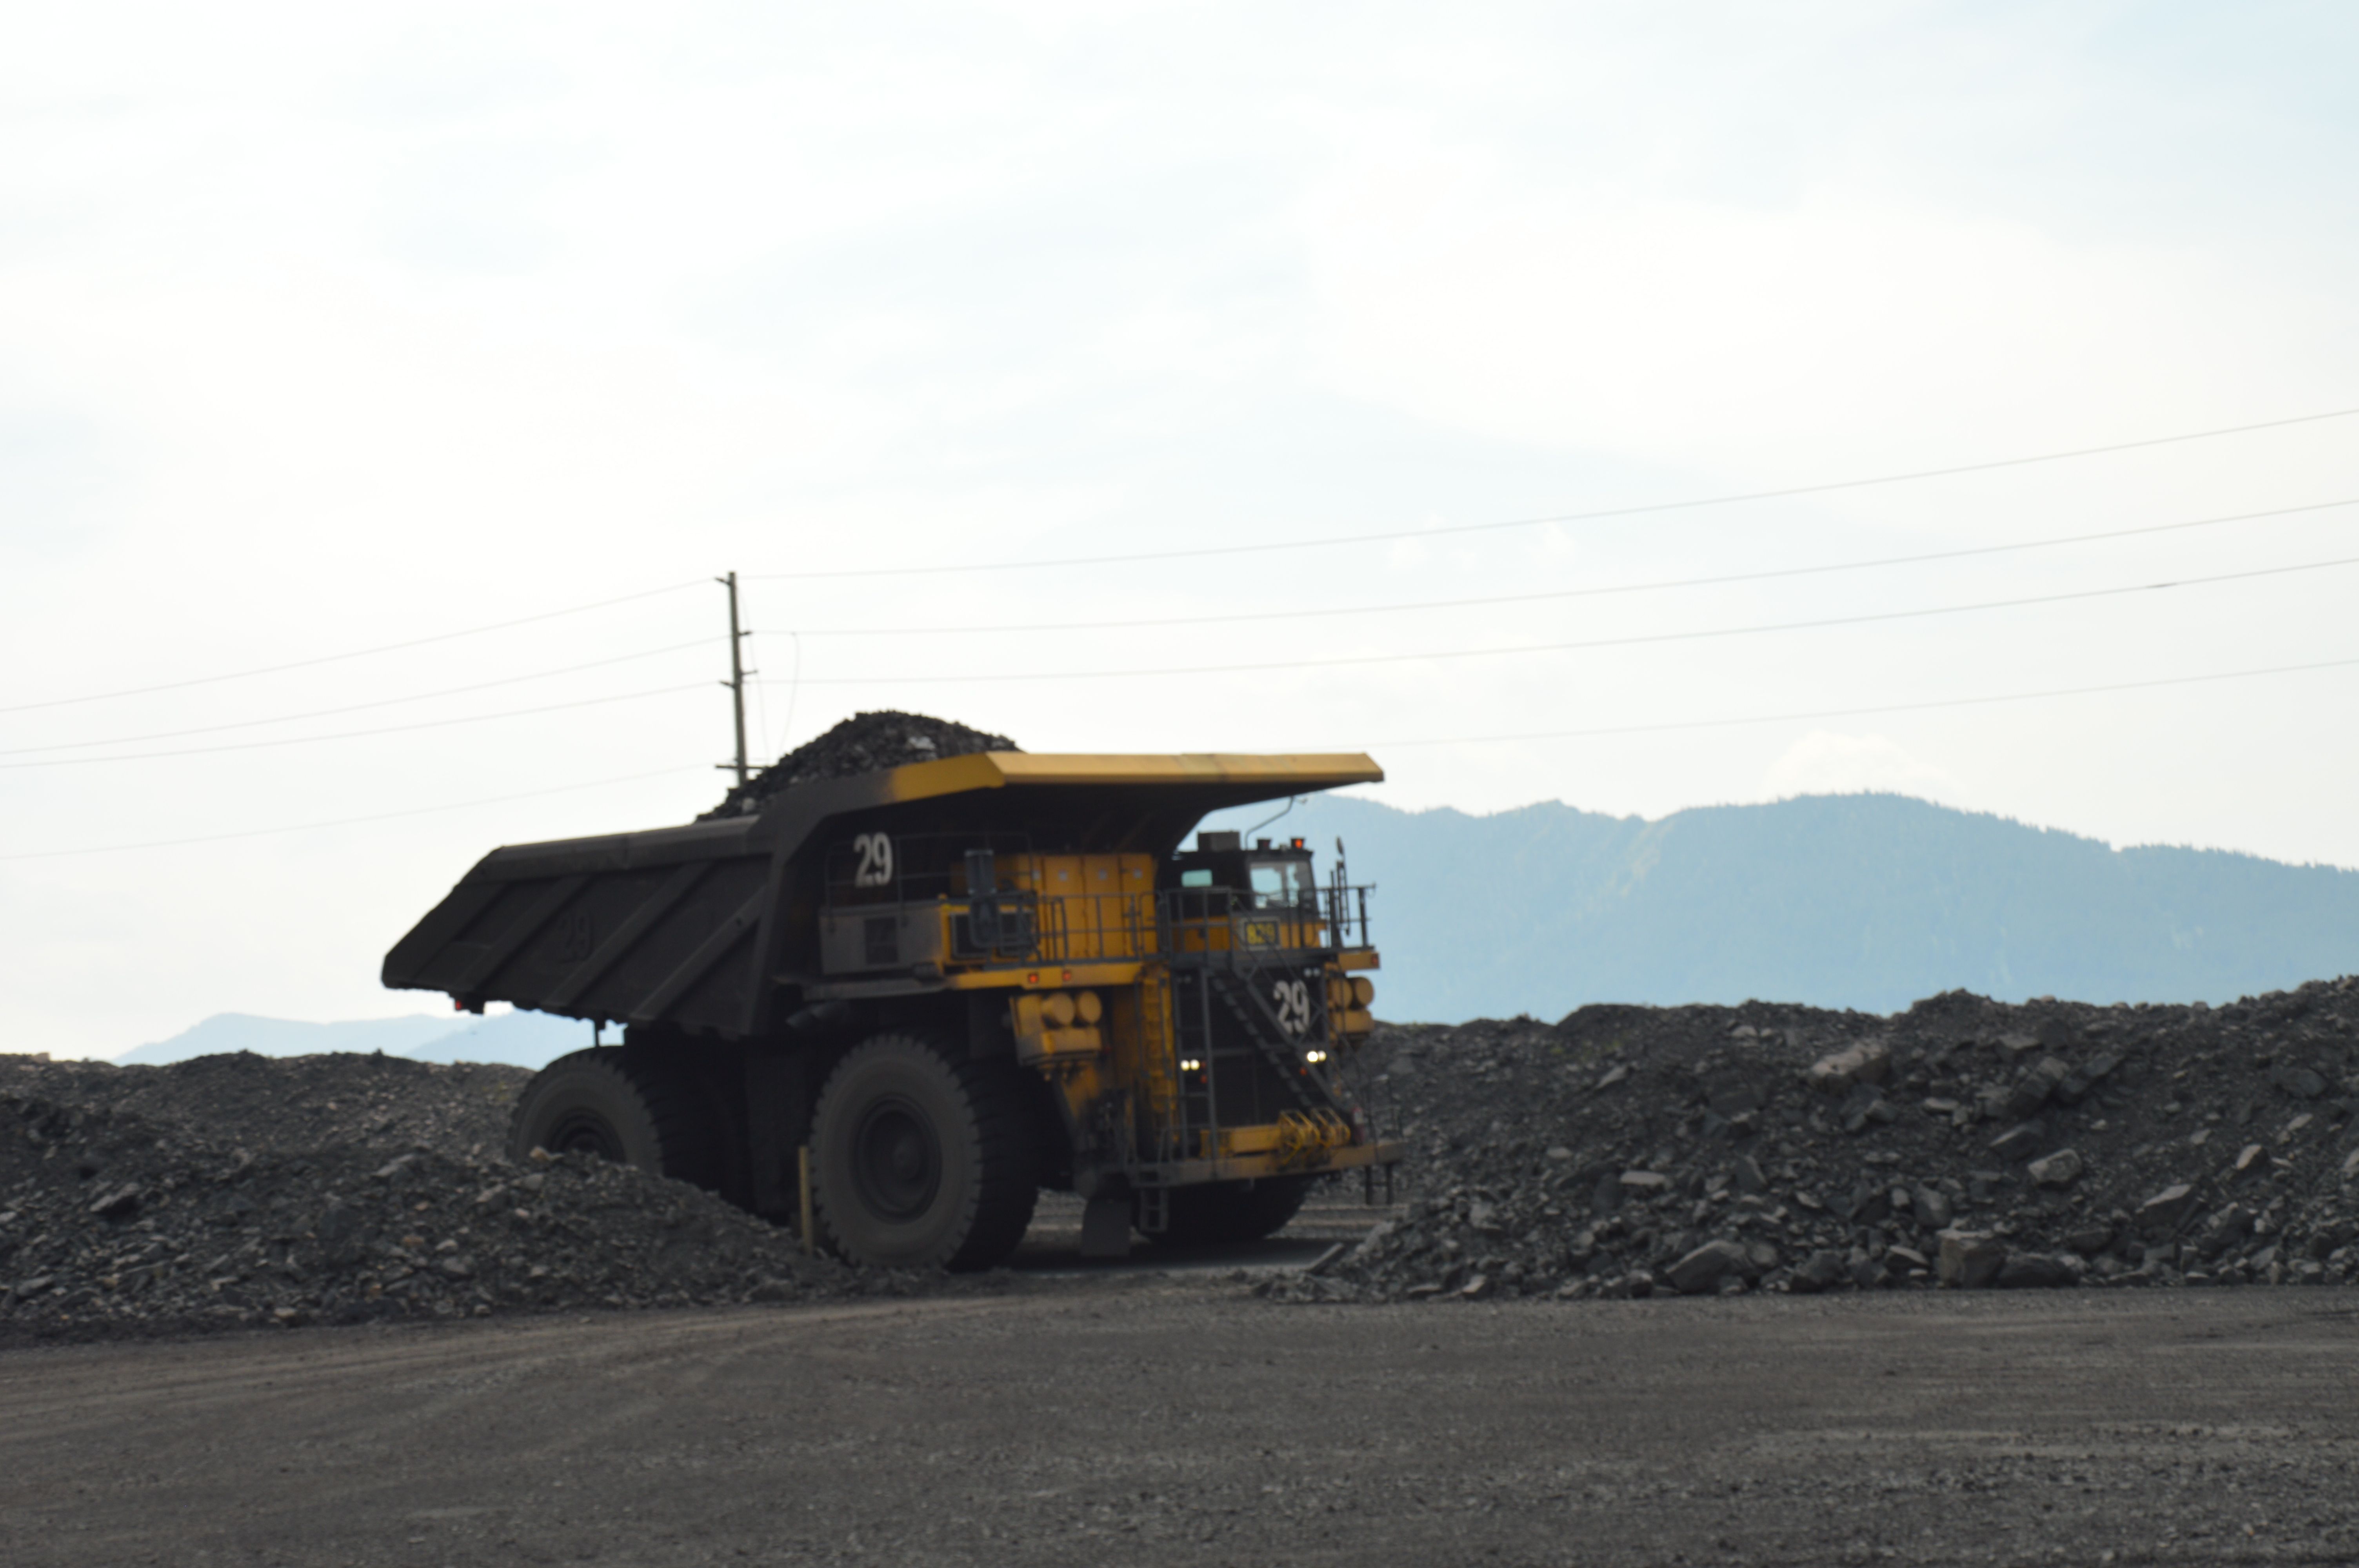 A haul truck with a full load as seen on the tour of the Elkview mine.